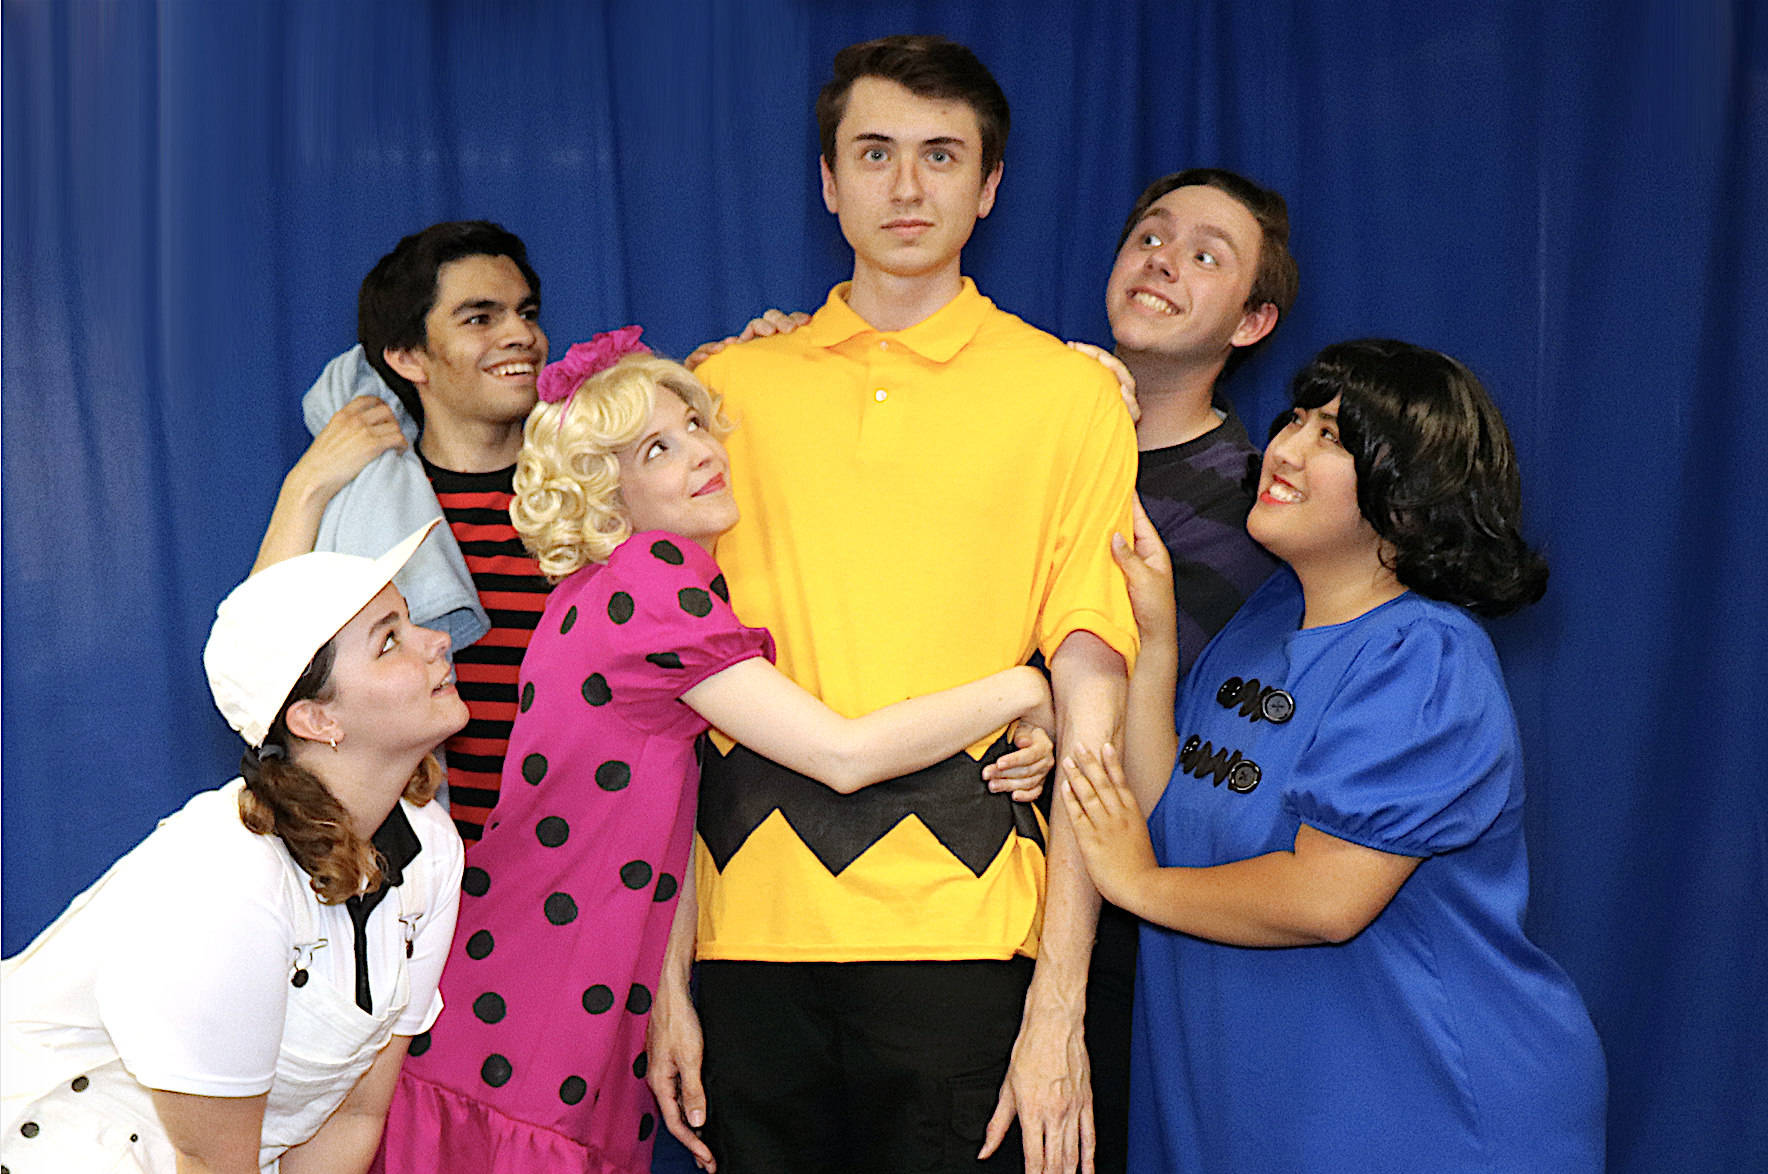 You’re a Good Man Charlie Brown comes to Sutter Street Theatre stage